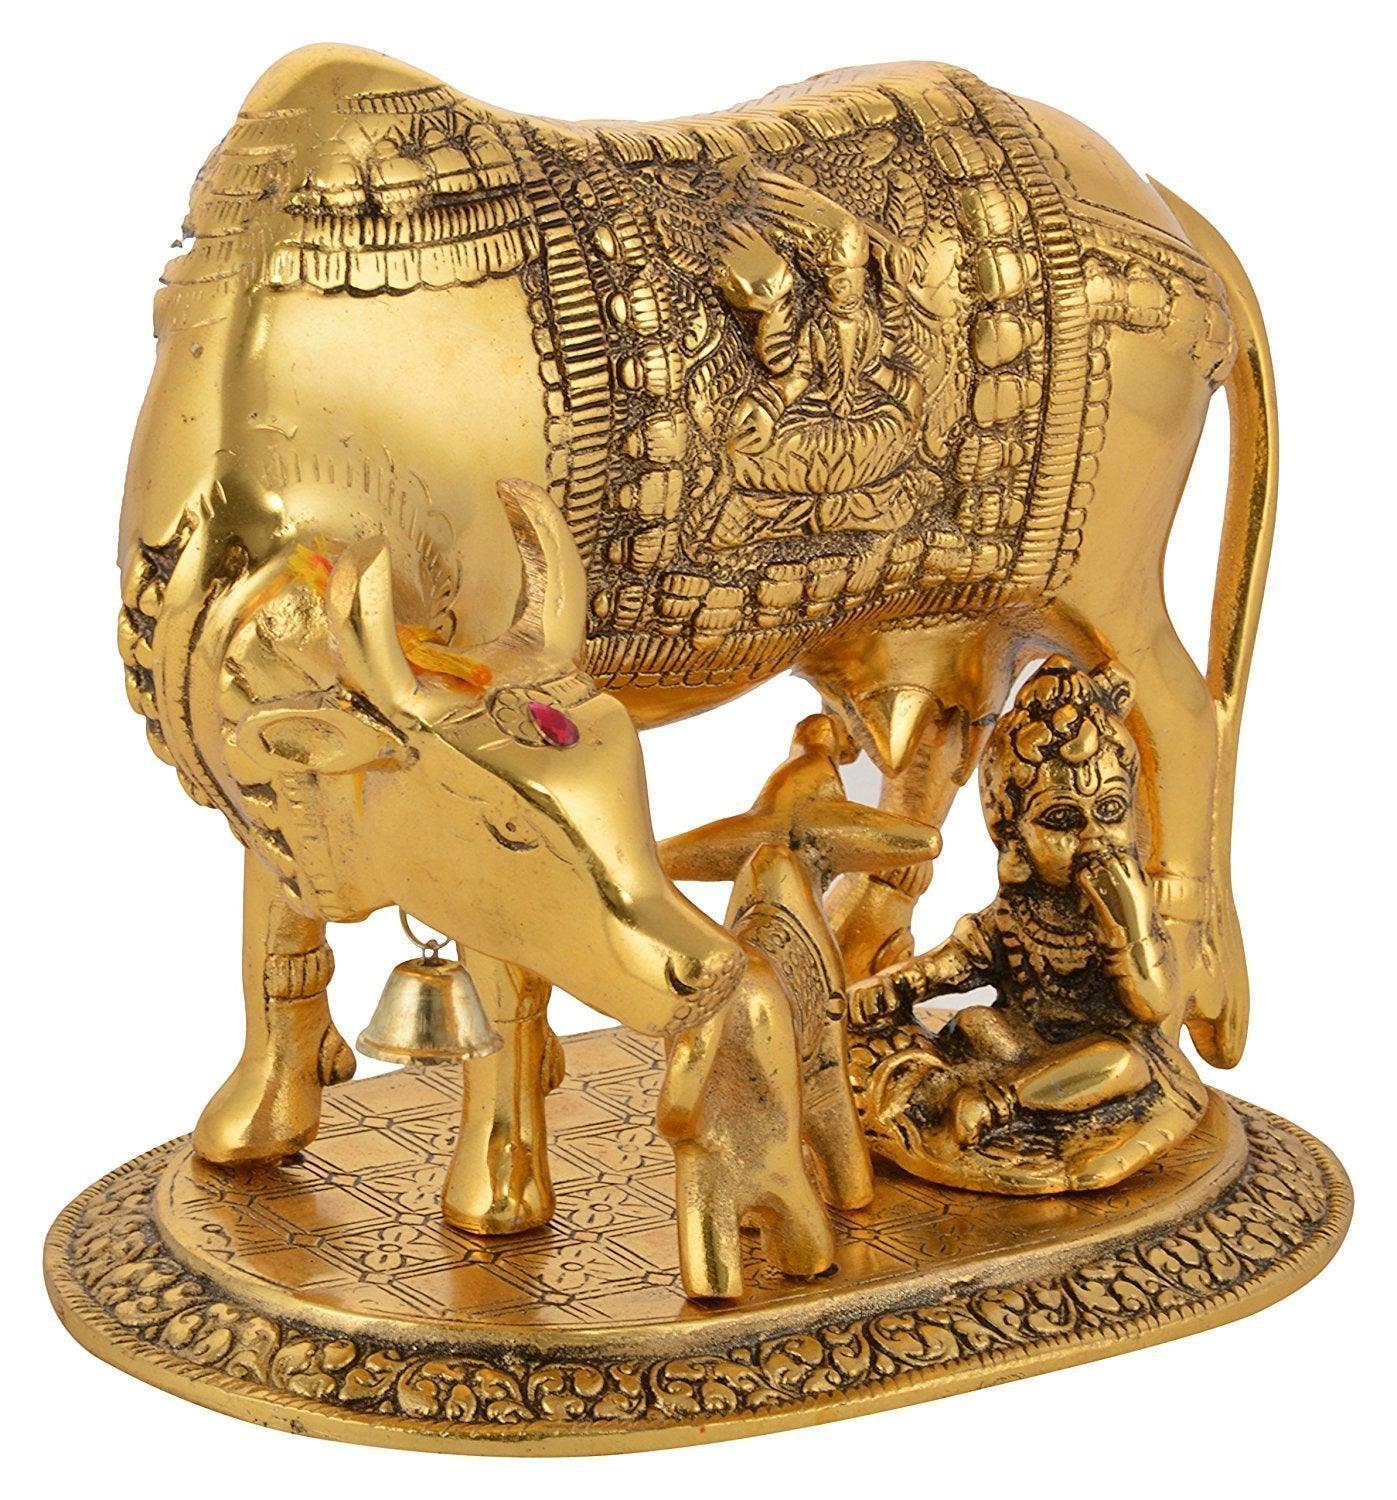 Large Gold Elegant Kamdhenu Cow and Calf Metal Statue Spiritual Showpiece Figurine Sculpture House Warming Gift & Home Decor Congratulatory Blessing Gift Item, Large size approx 9 inch - GreentouchCrafts